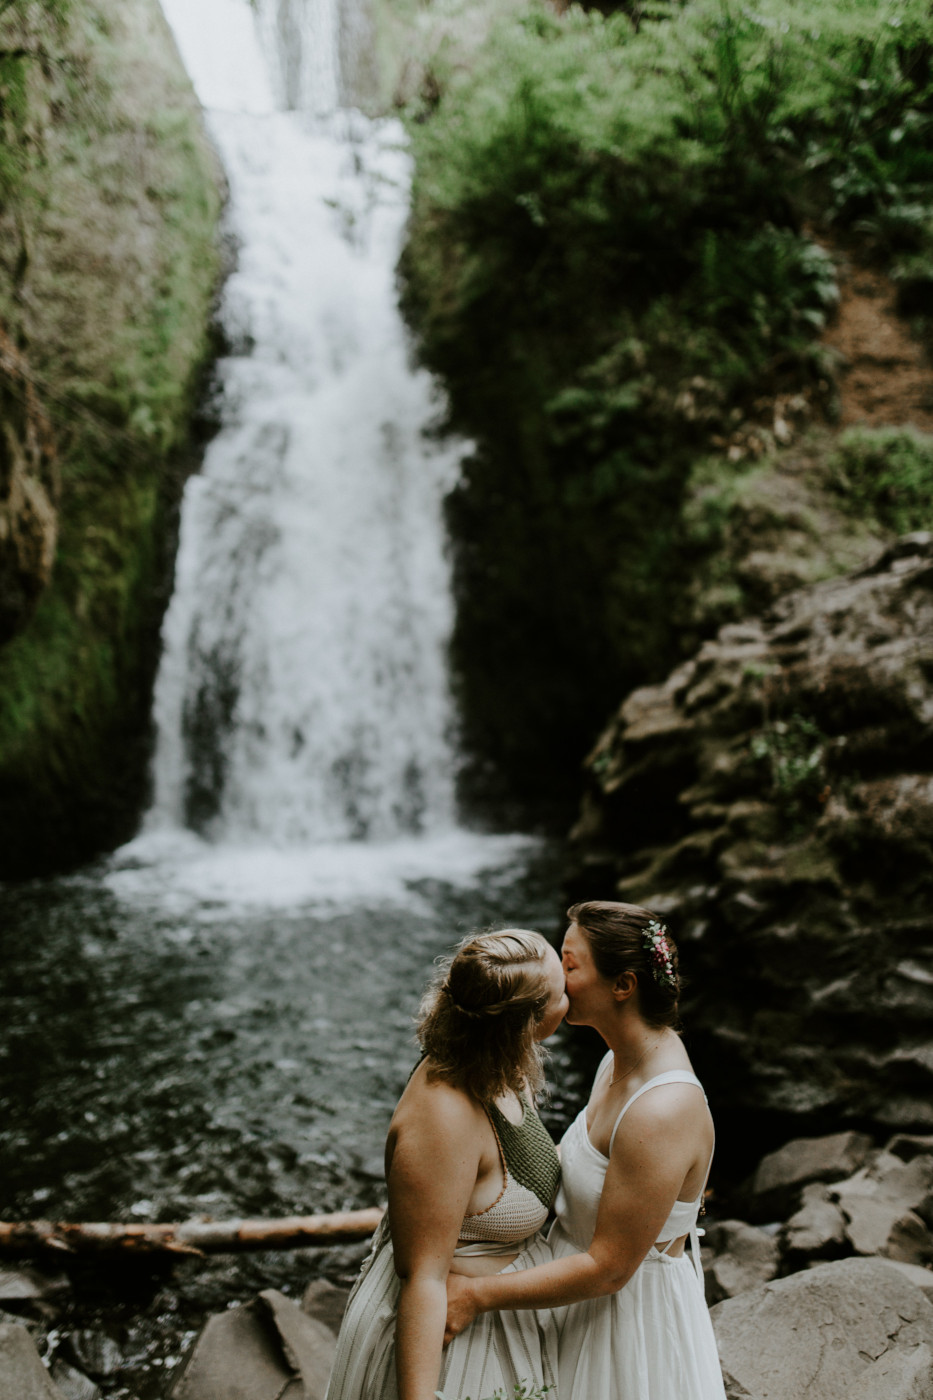 Kate and Audrey kiss in front of a waterfall. Elopement wedding photography at Bridal Veil Falls by Sienna Plus Josh.